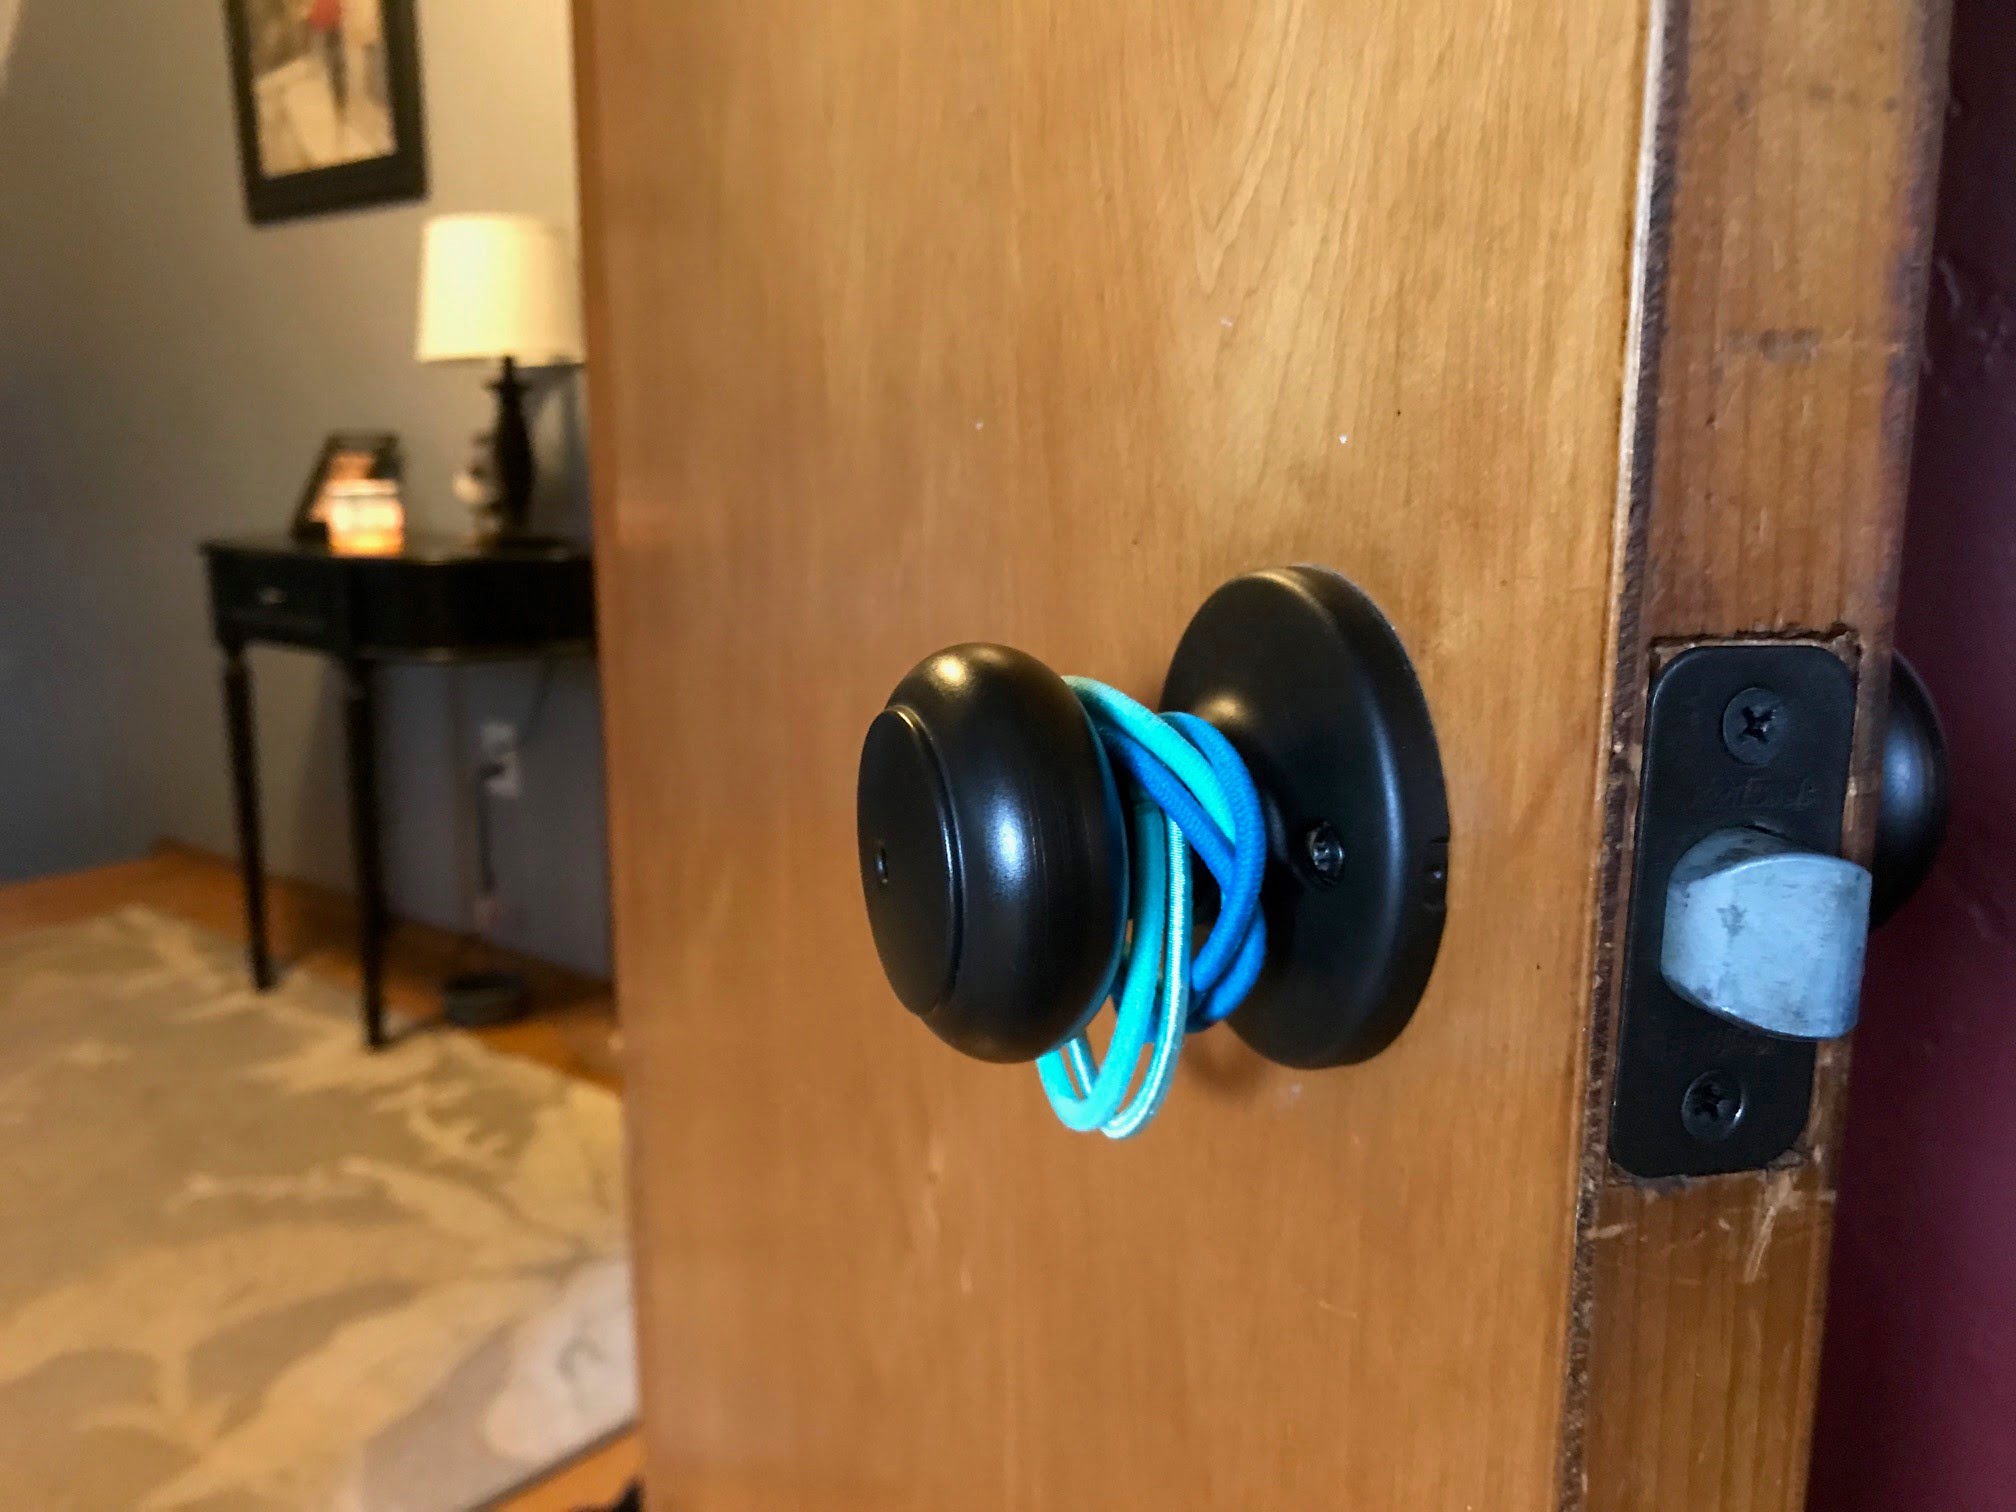 How To Lock A Door With A Hair Tie